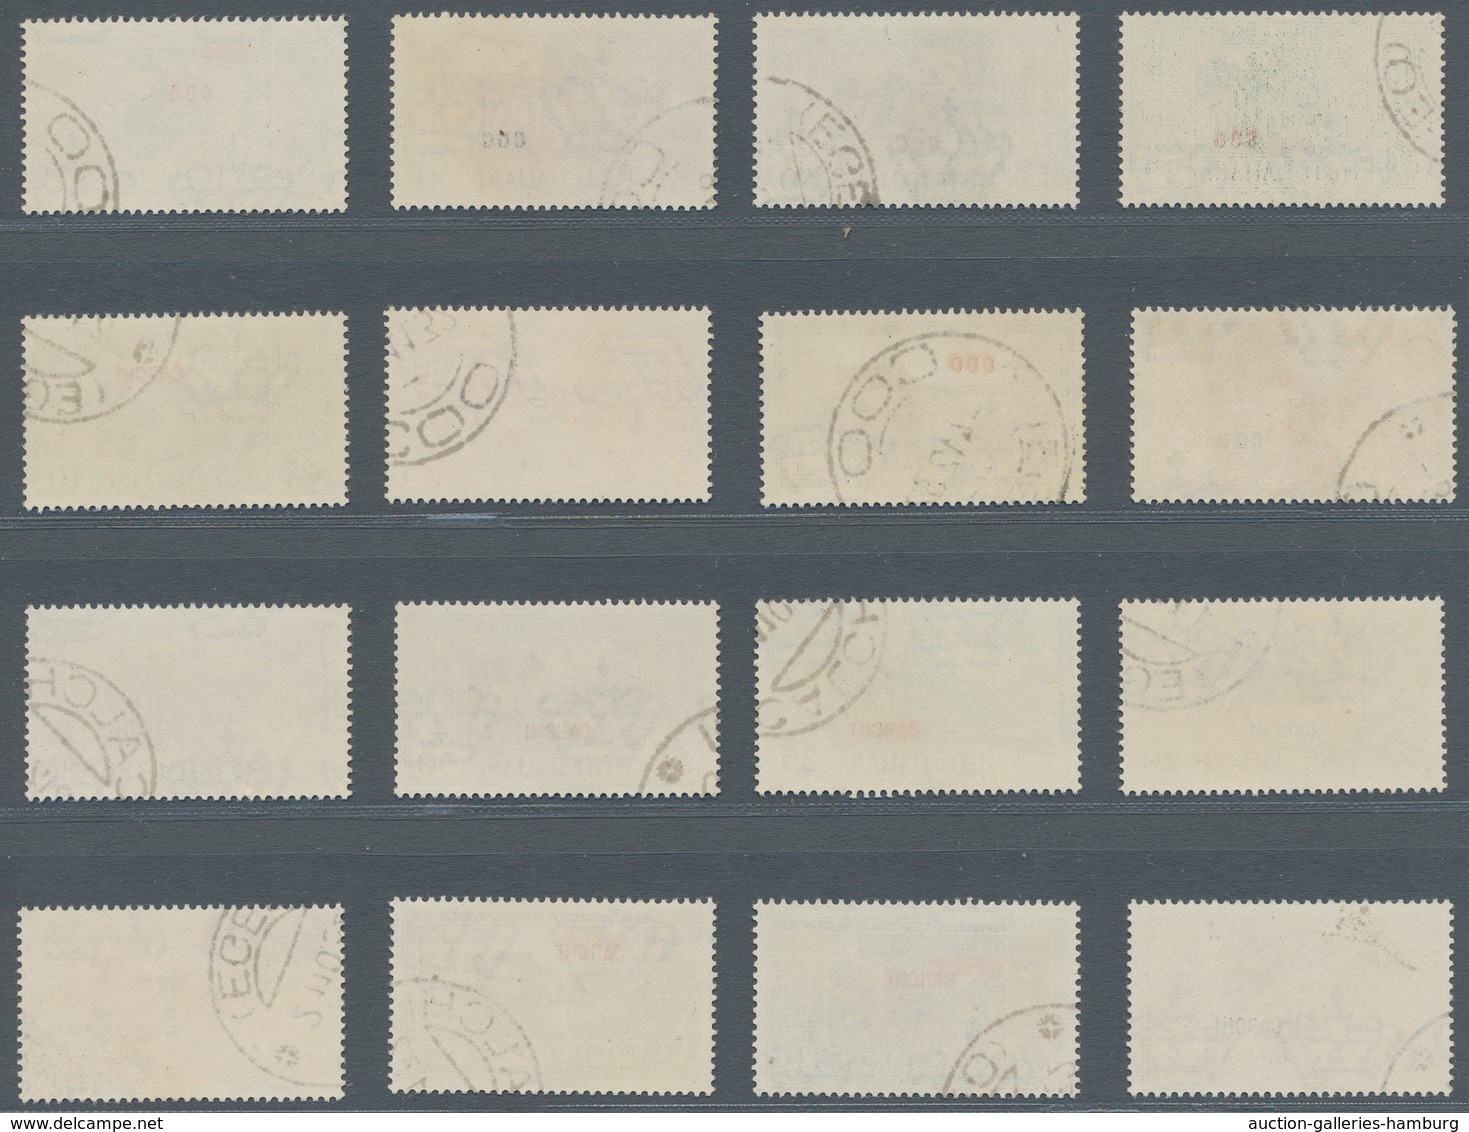 Ägäische Inseln: 1932, "Garibaldi with all island overprints", used sets in very fine condition. In